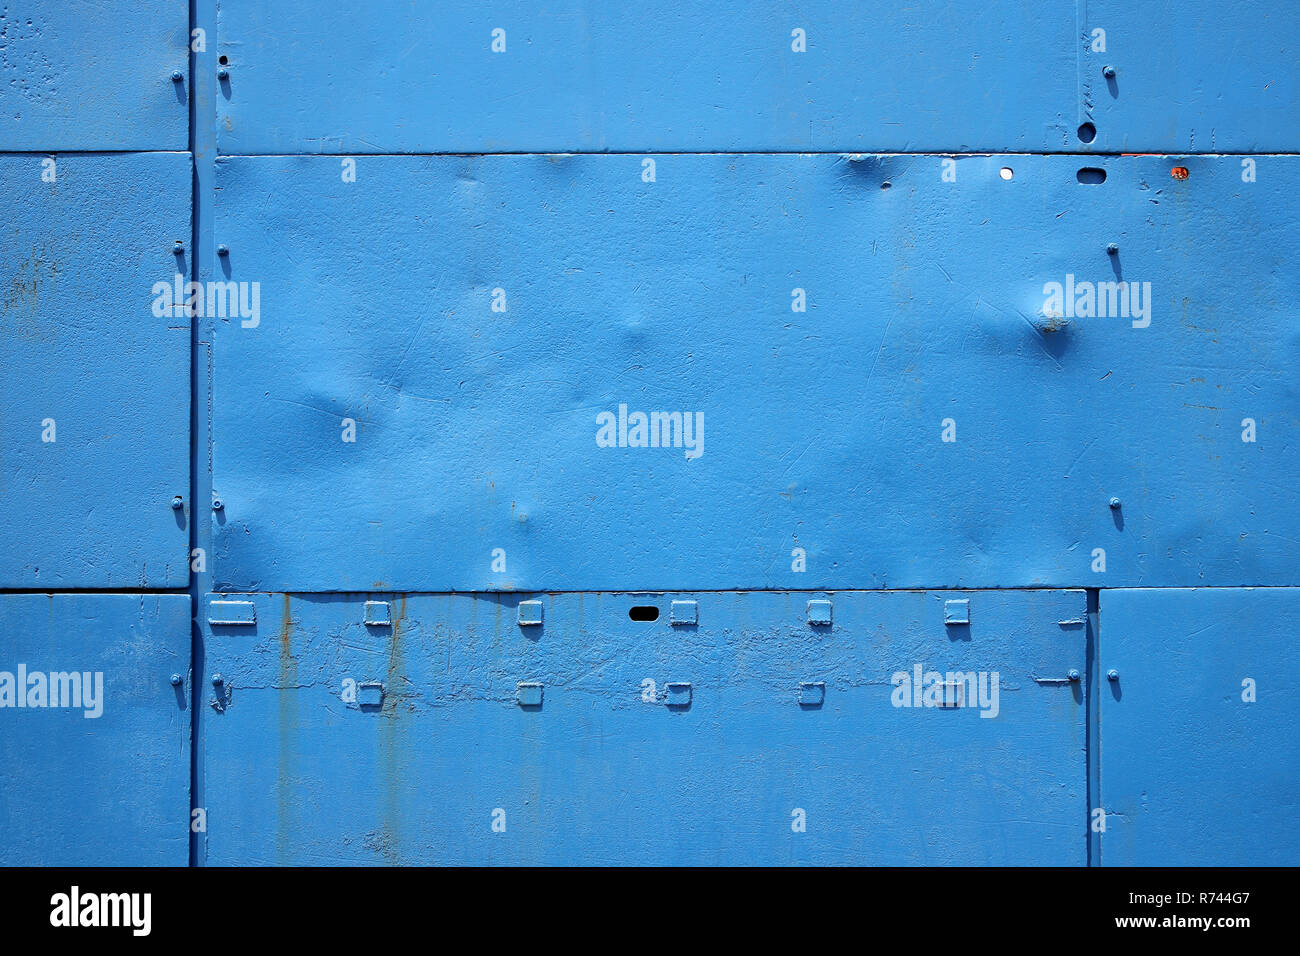 Blue painted metal surface. Abstract backgrund. Template Stock Photo